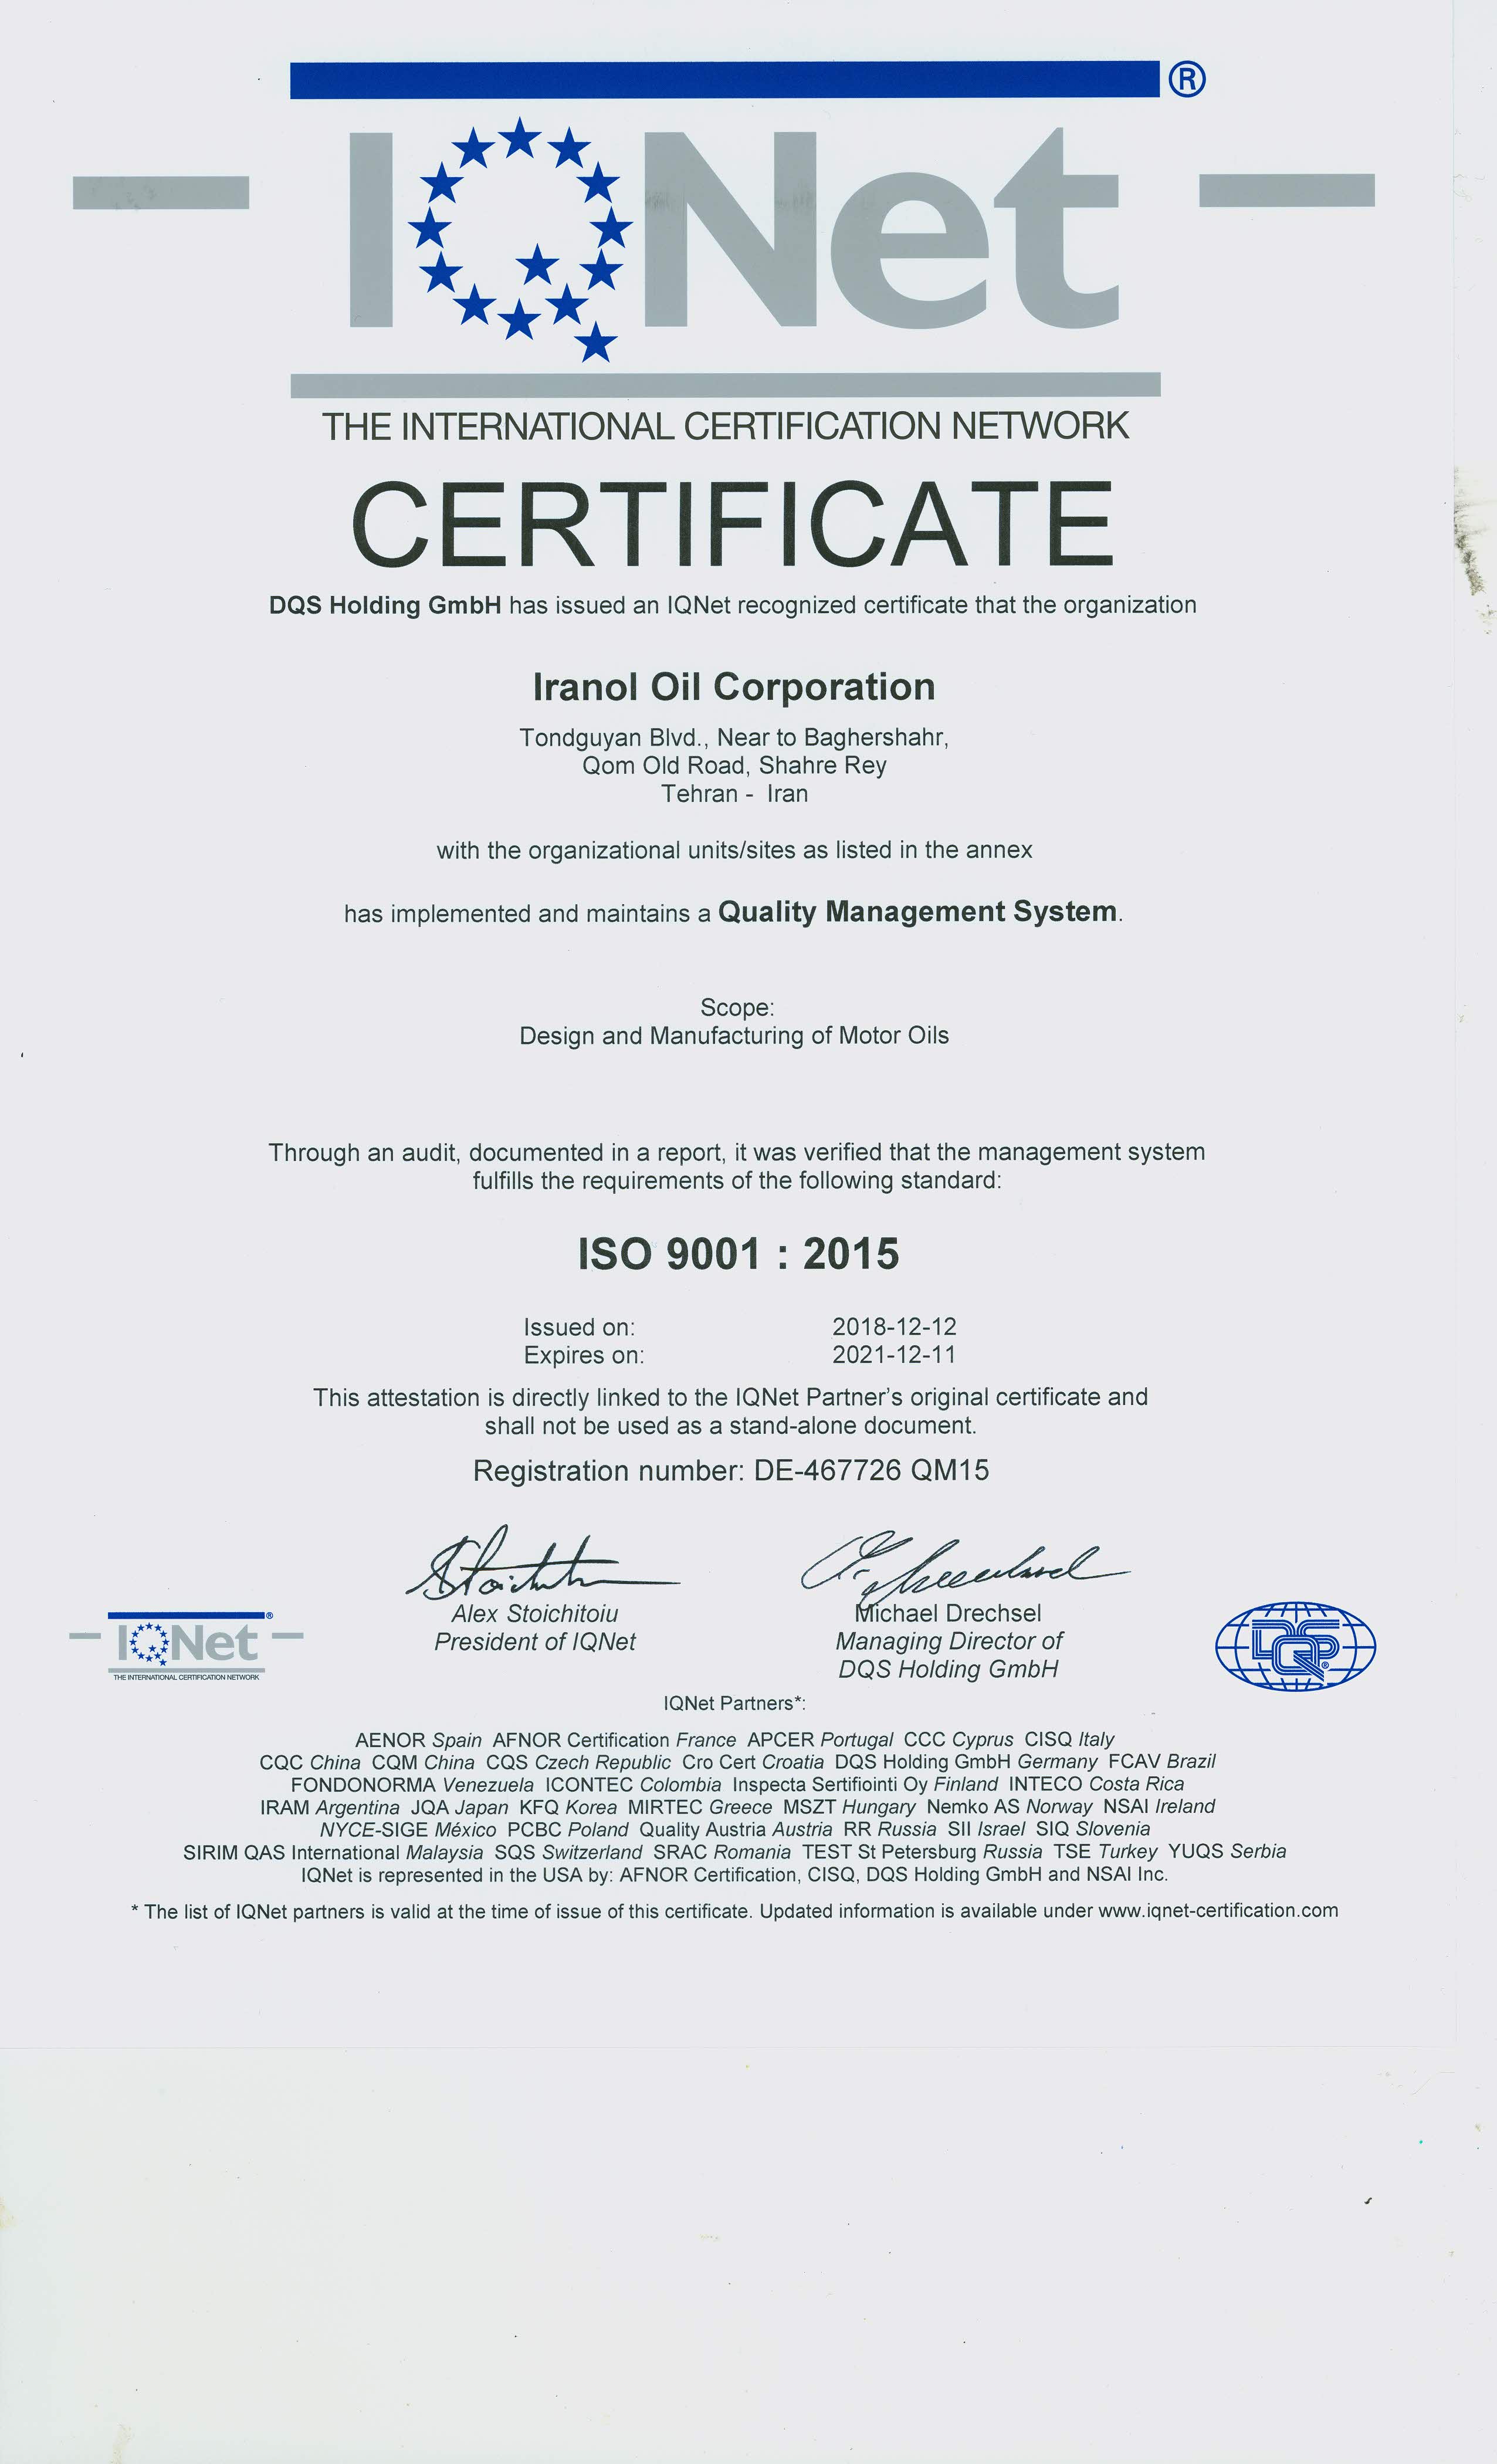 ISO 9001.2015